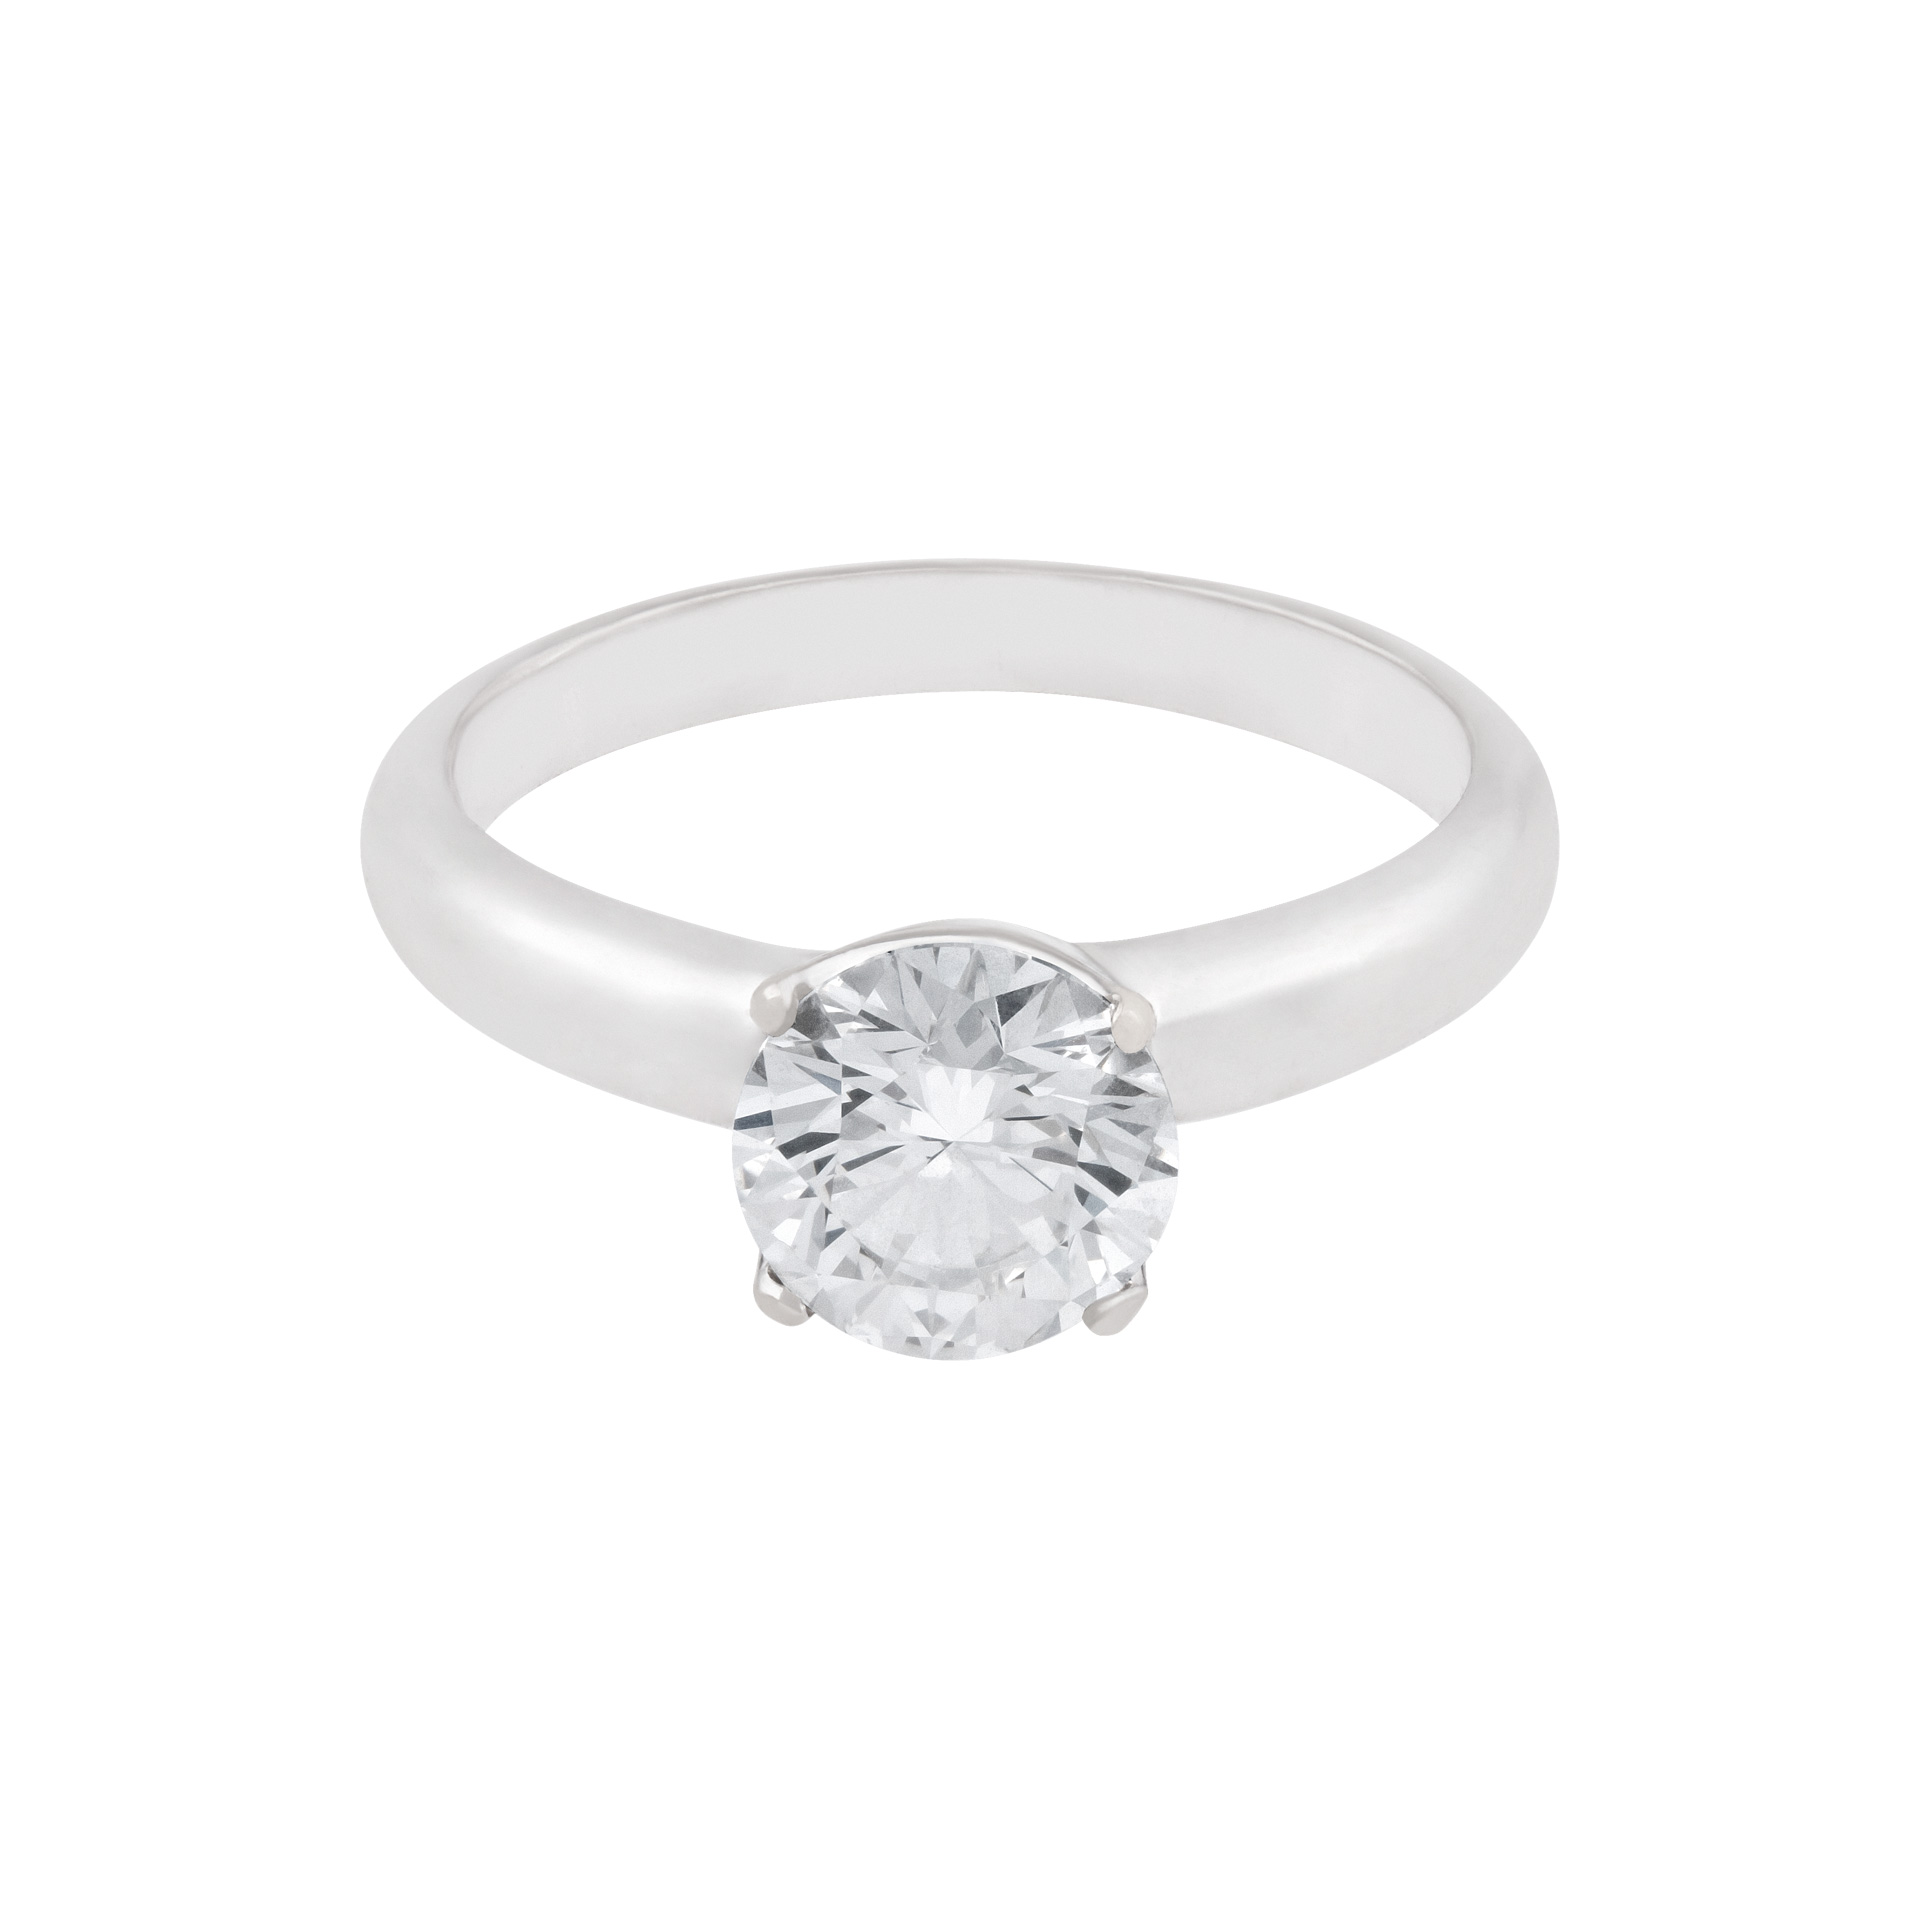 GIA Certified Round Diamond 1.16 Carats (F Color, VS2 Clarity) ring set in 18k white gold. Size 4.5 image 1